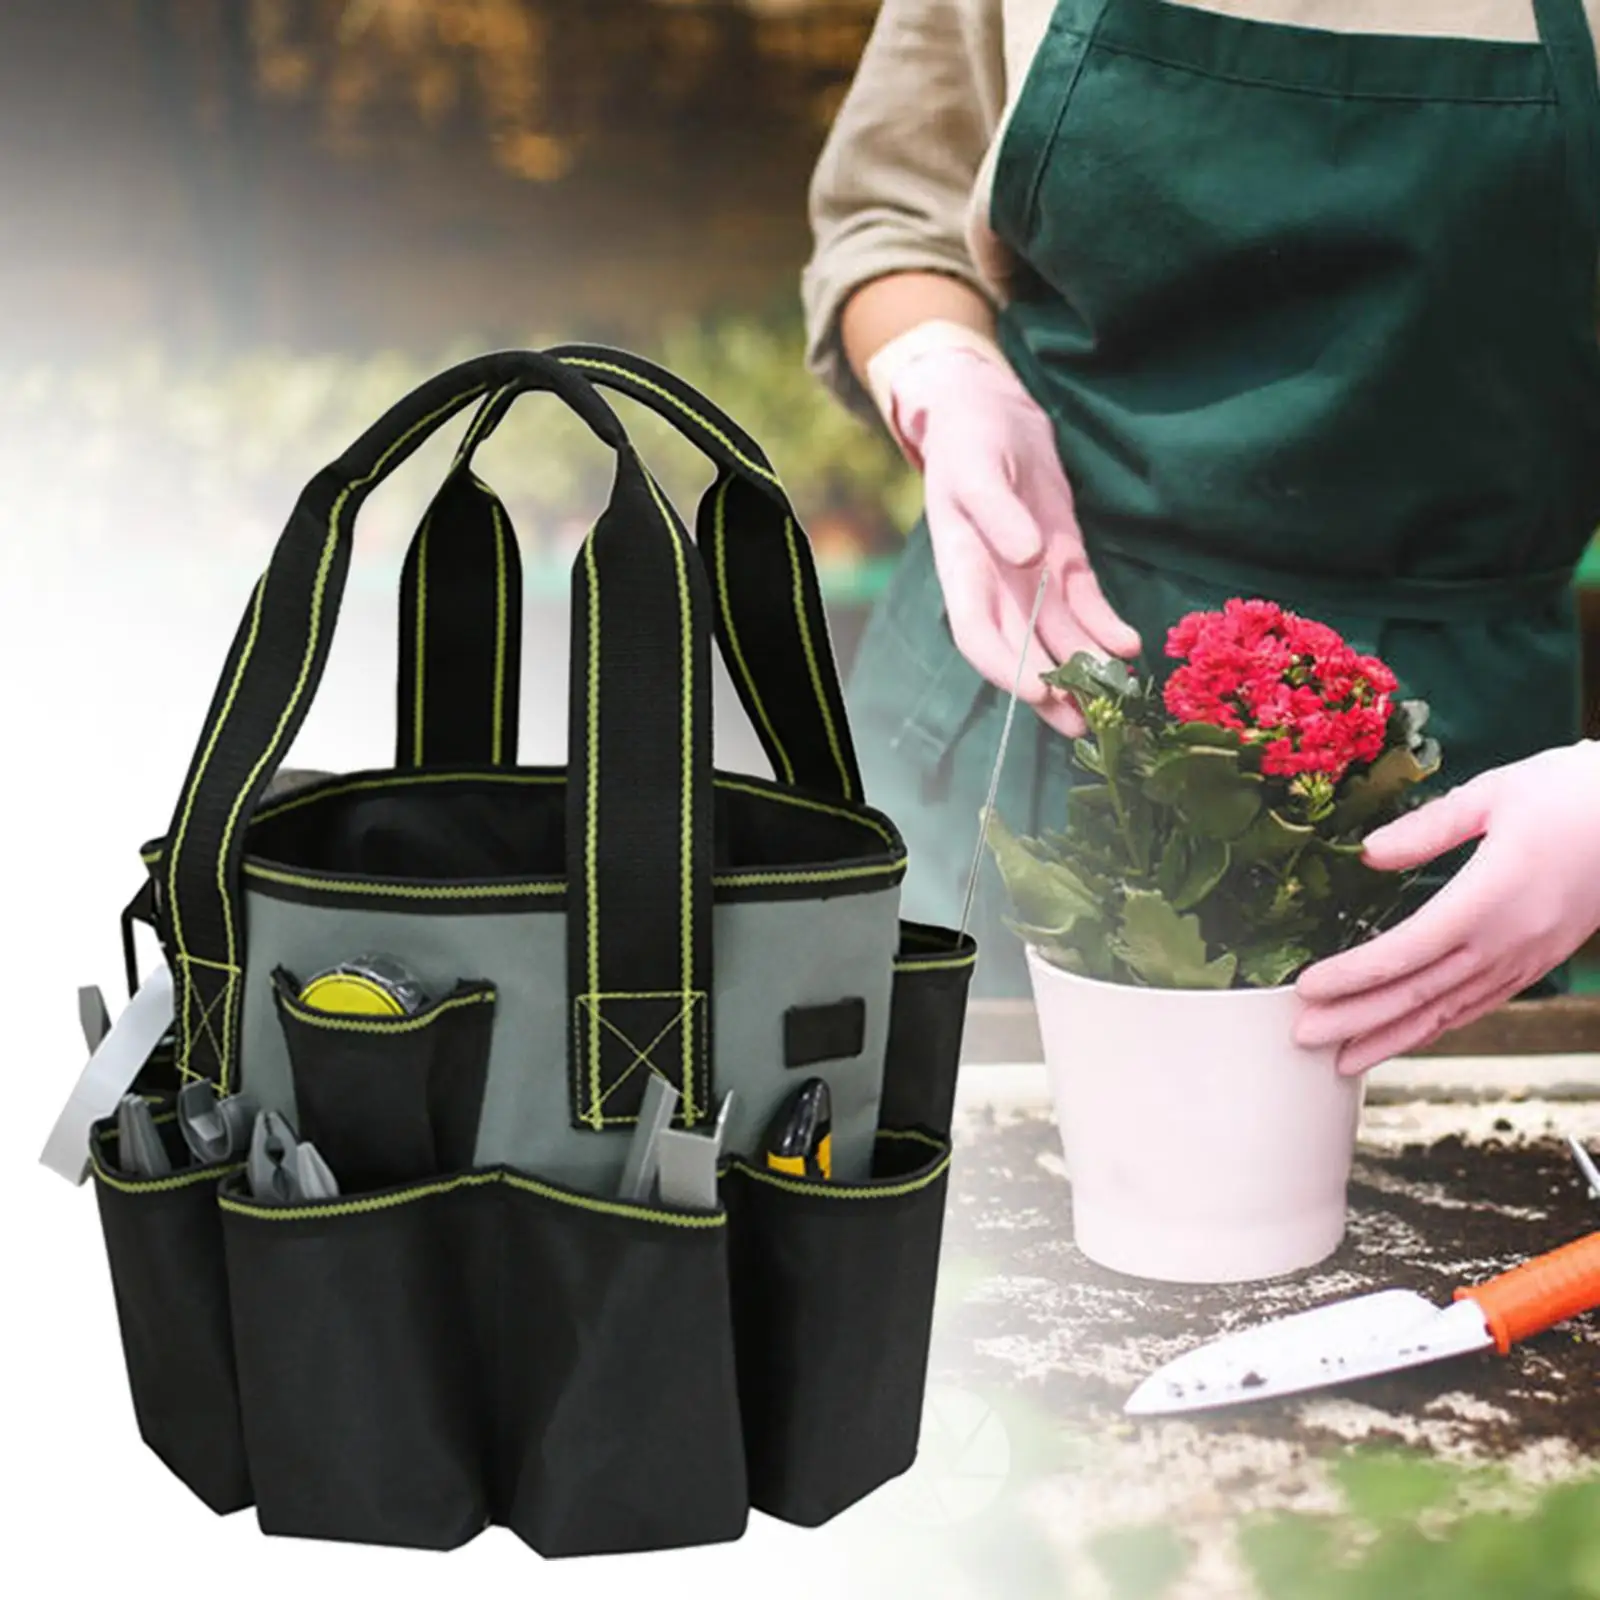 Garden Tool Bag Hand Tool Storage Basket Professional Sturdy Handle for Workers Carpenter Compact Gardening Tool Kits Holder